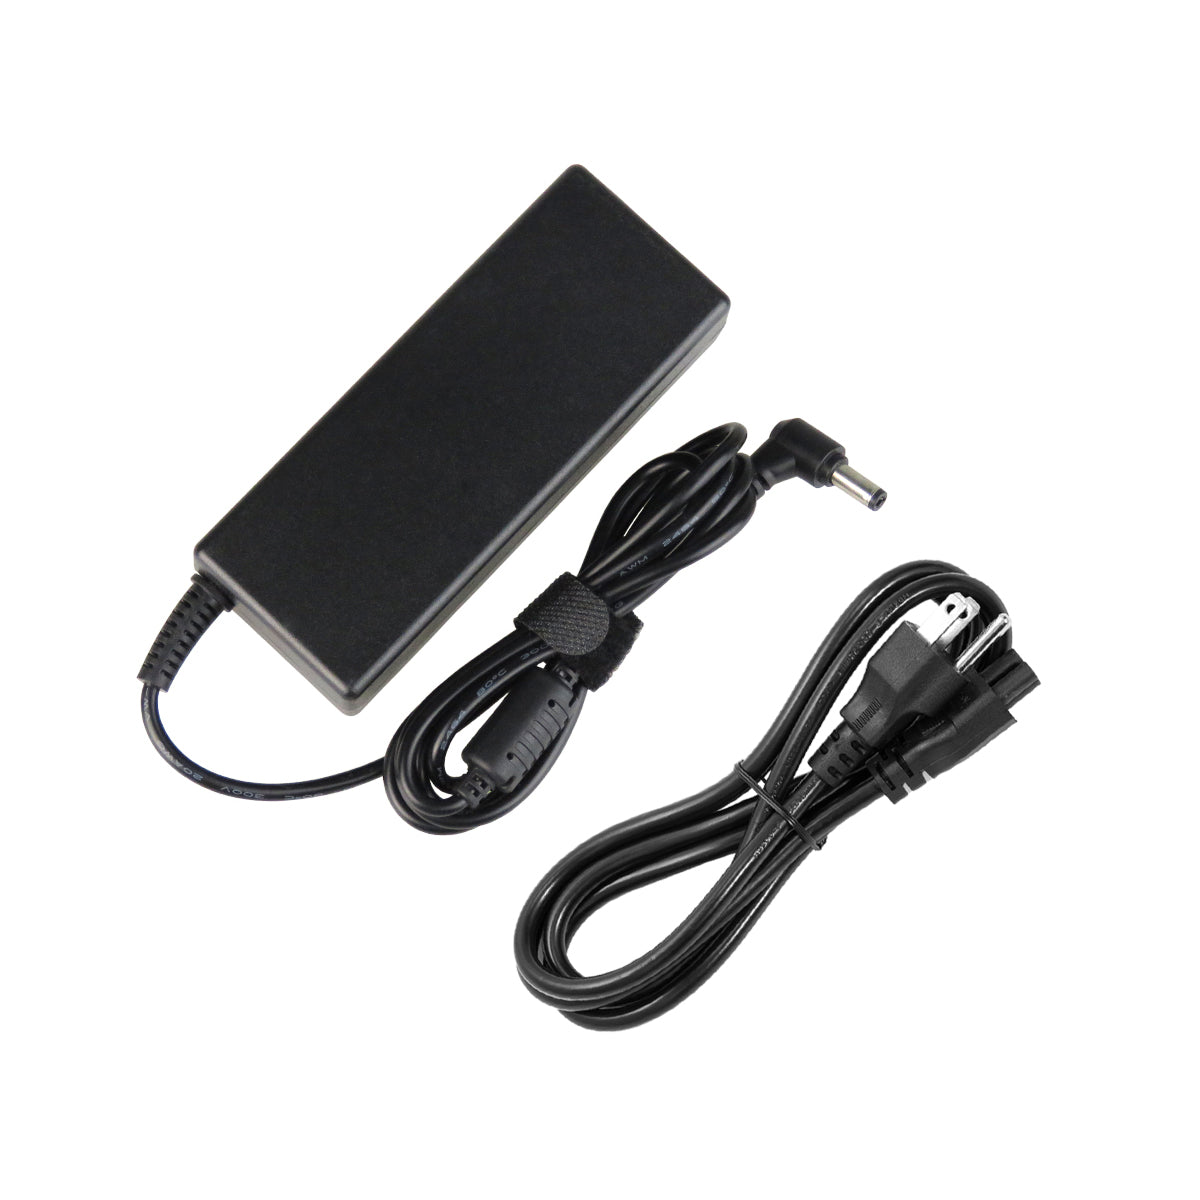 AC Adapter Charger for ASUS K43SJ Notebook.